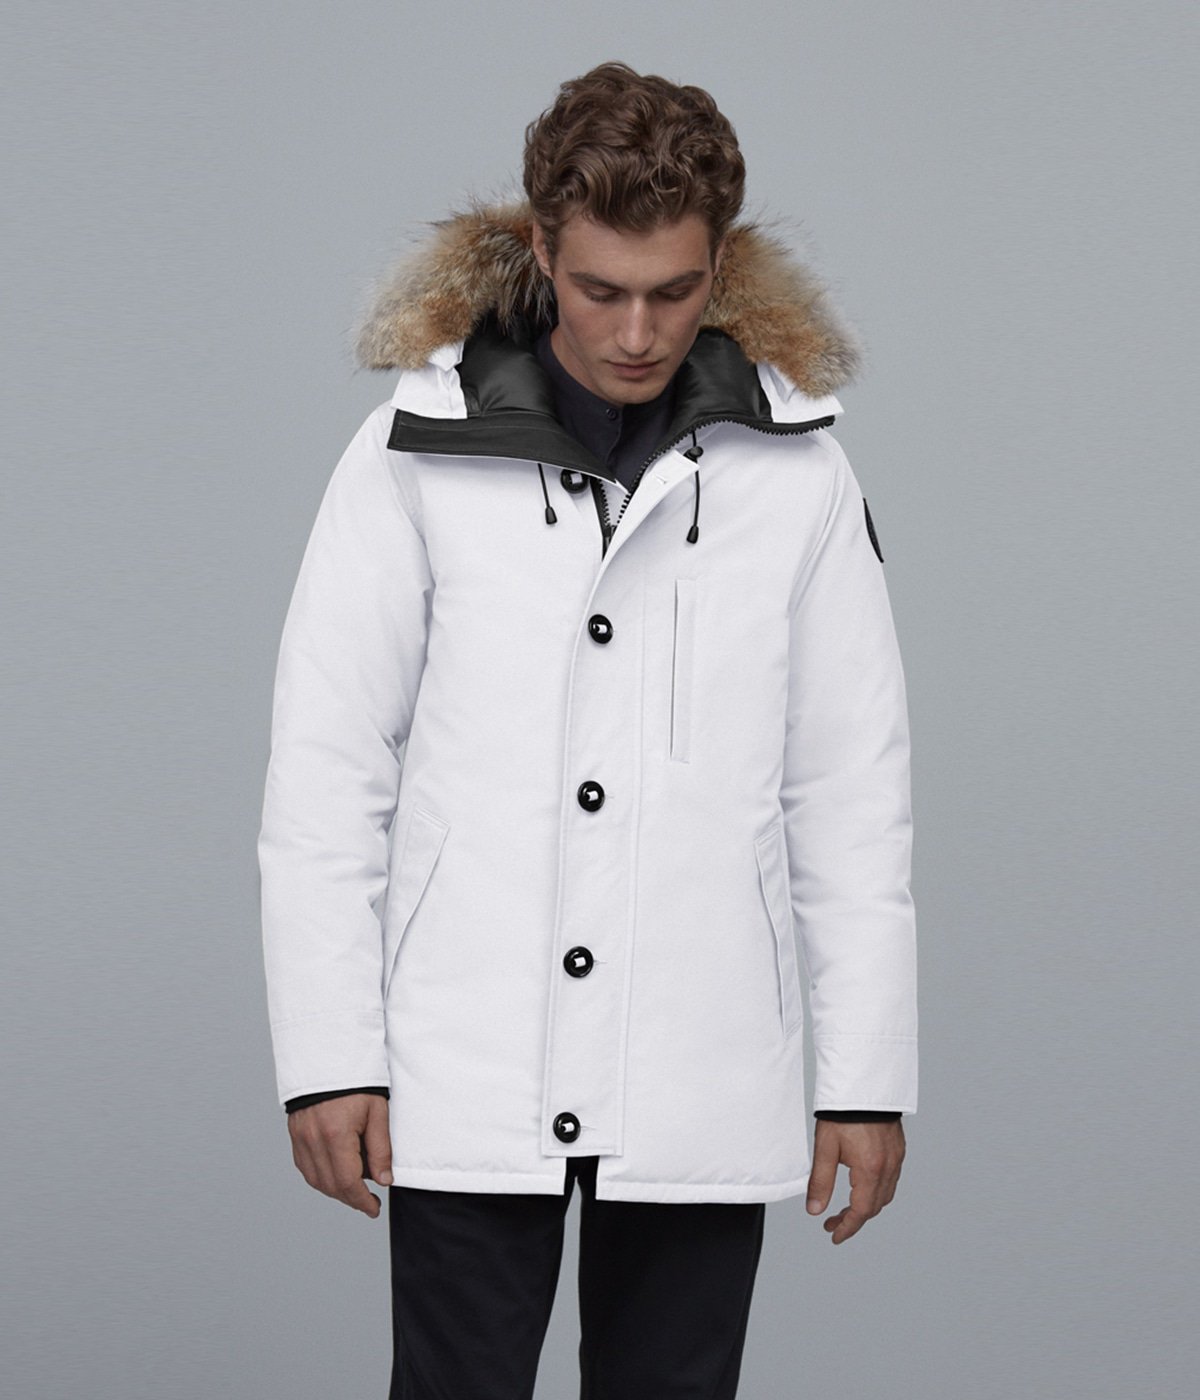 Chateau Parka Black Label Heritage | CANADA GOOSE(カナダグース